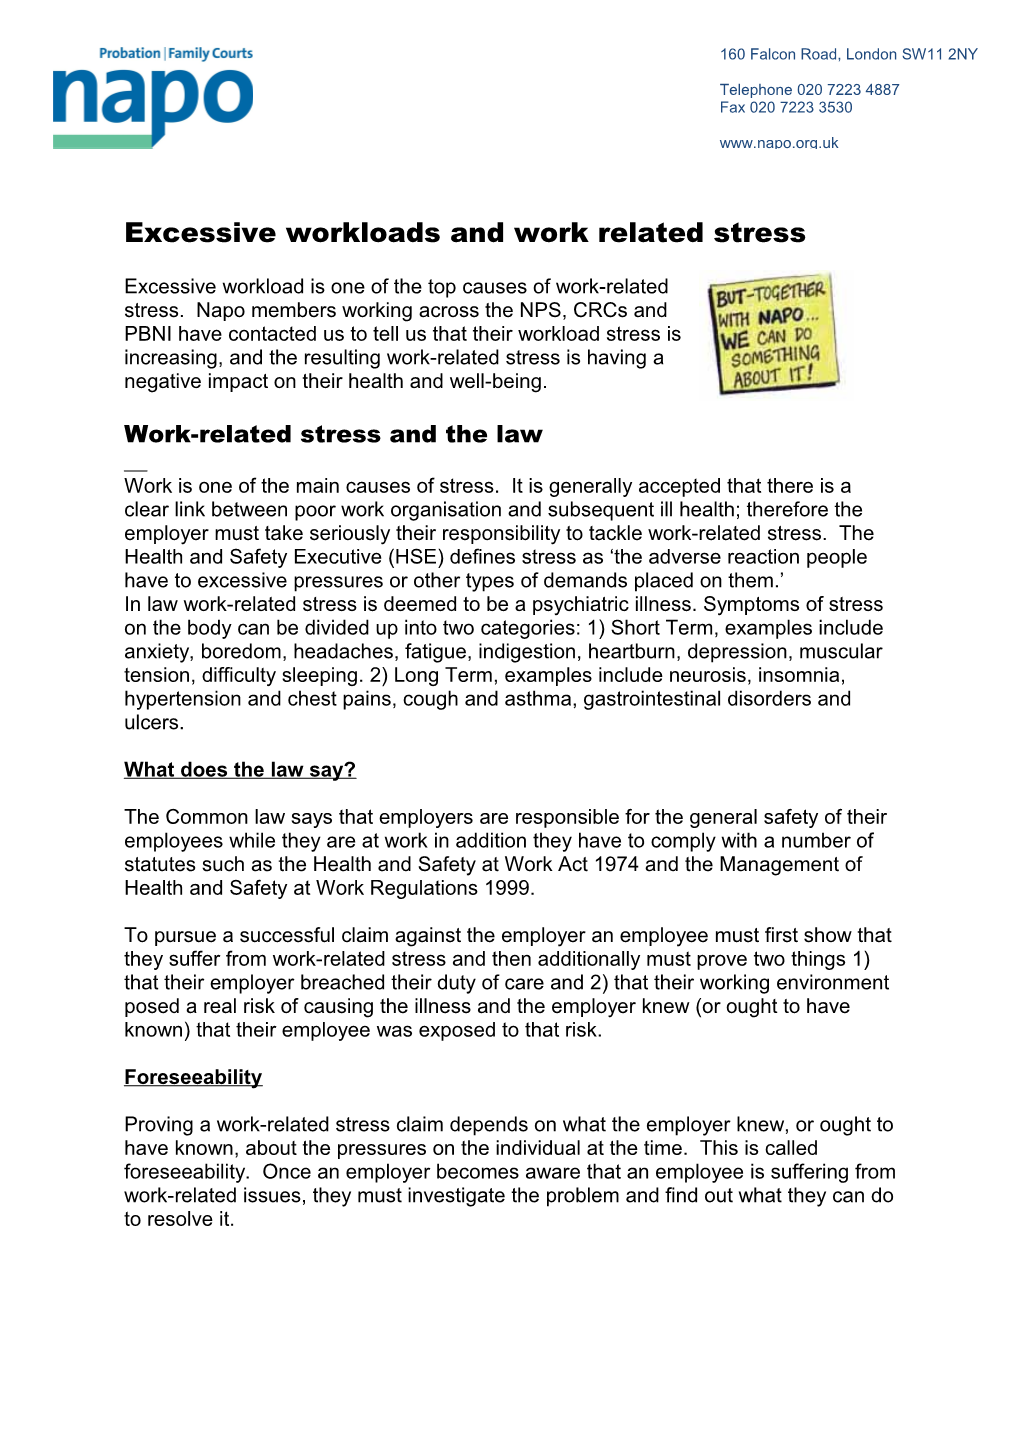 Excessive Workloads and Work Related Stress